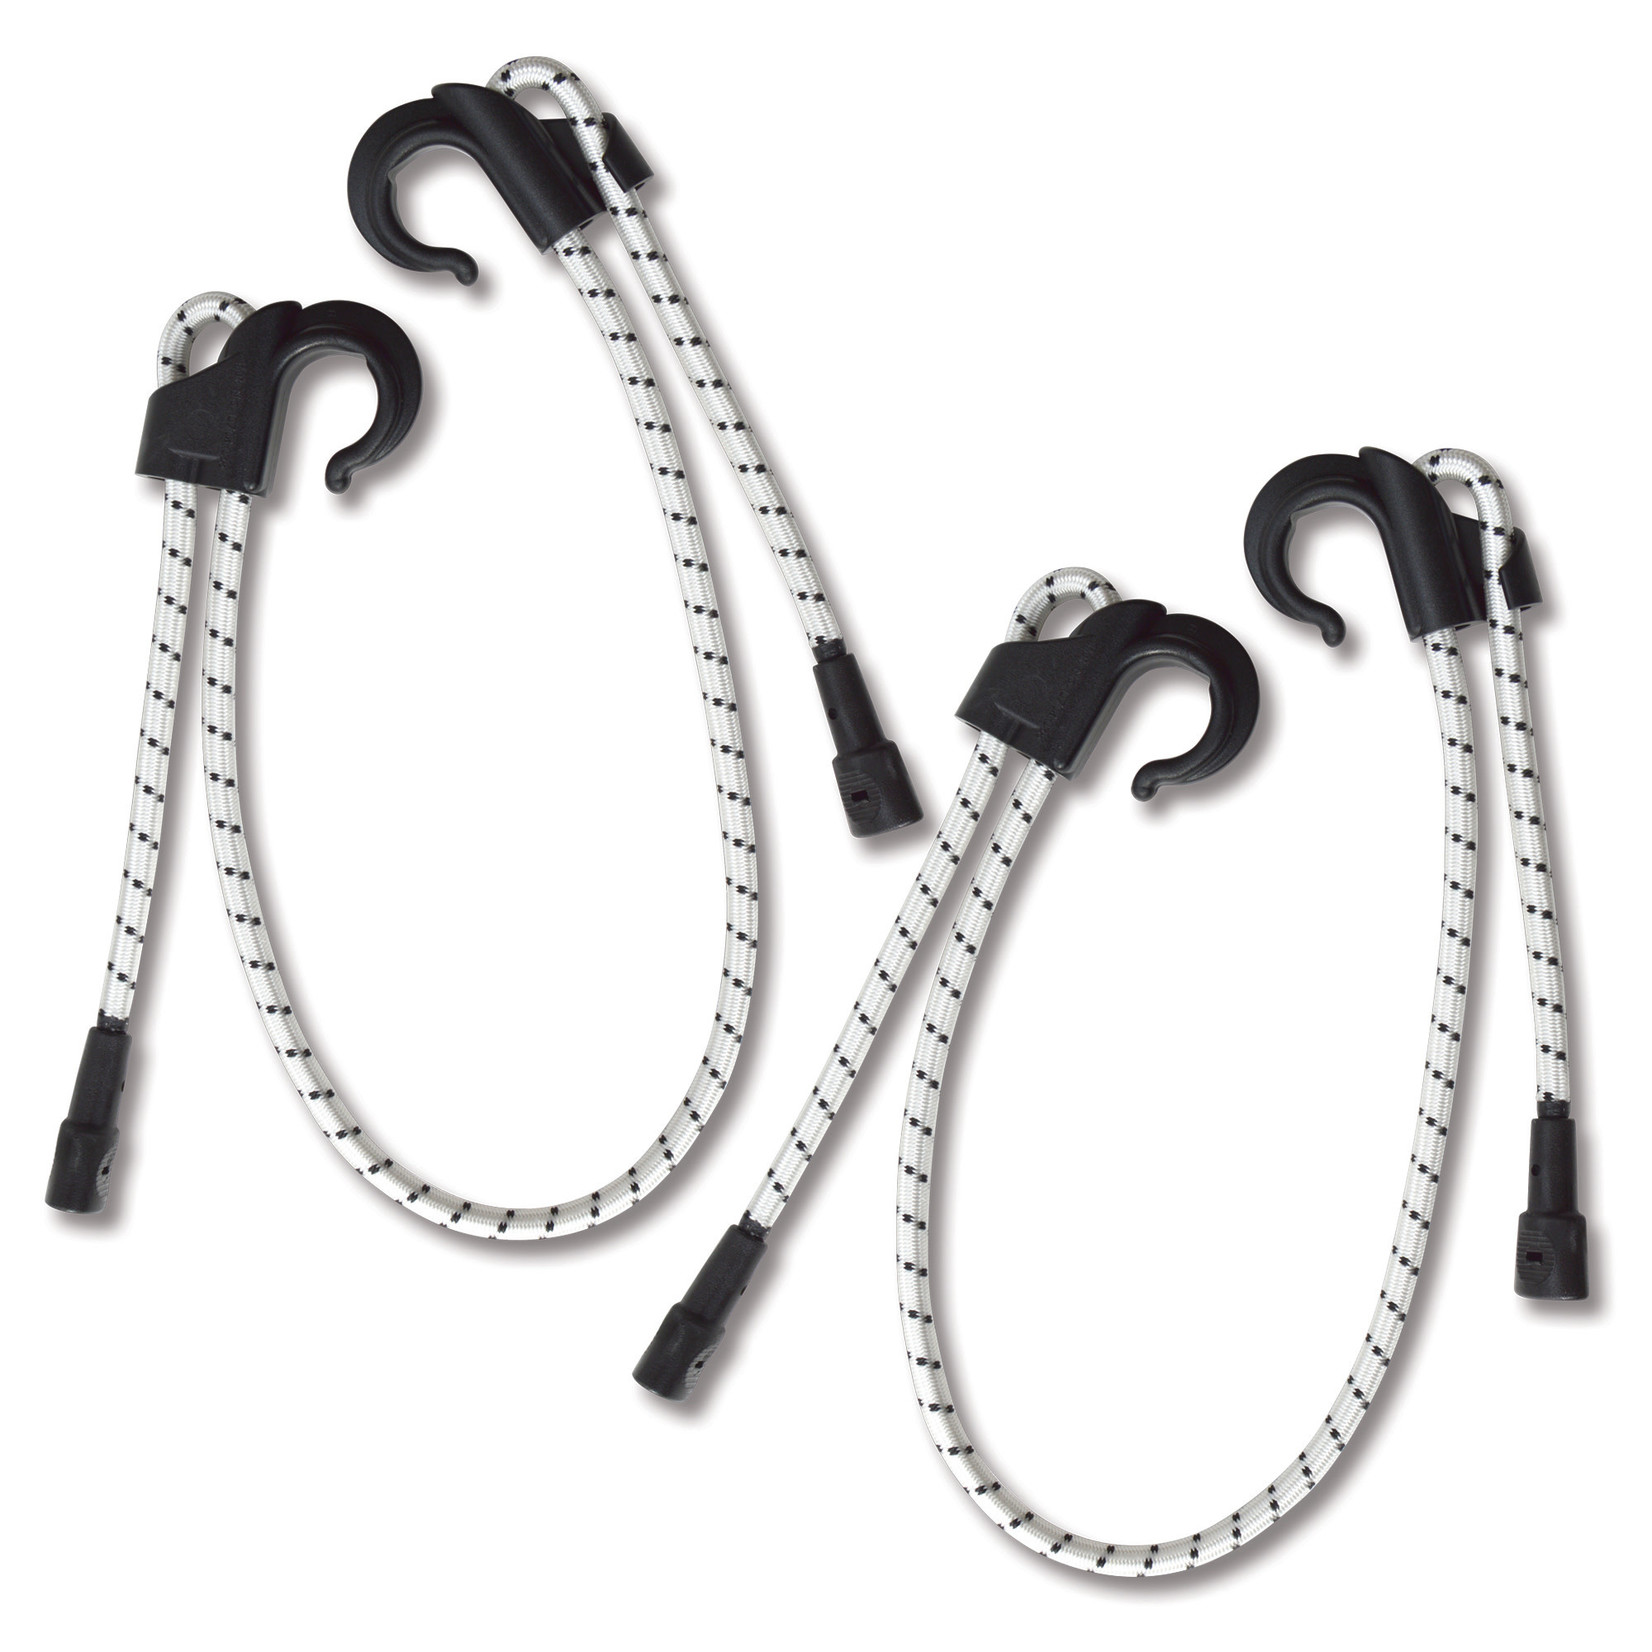 BUNGEE CORD MONKEY FINGERS DURA PLASTIC 6-60in ADJUSTABLE DOUBLE PACK BK -  Bishop's Family Cycles